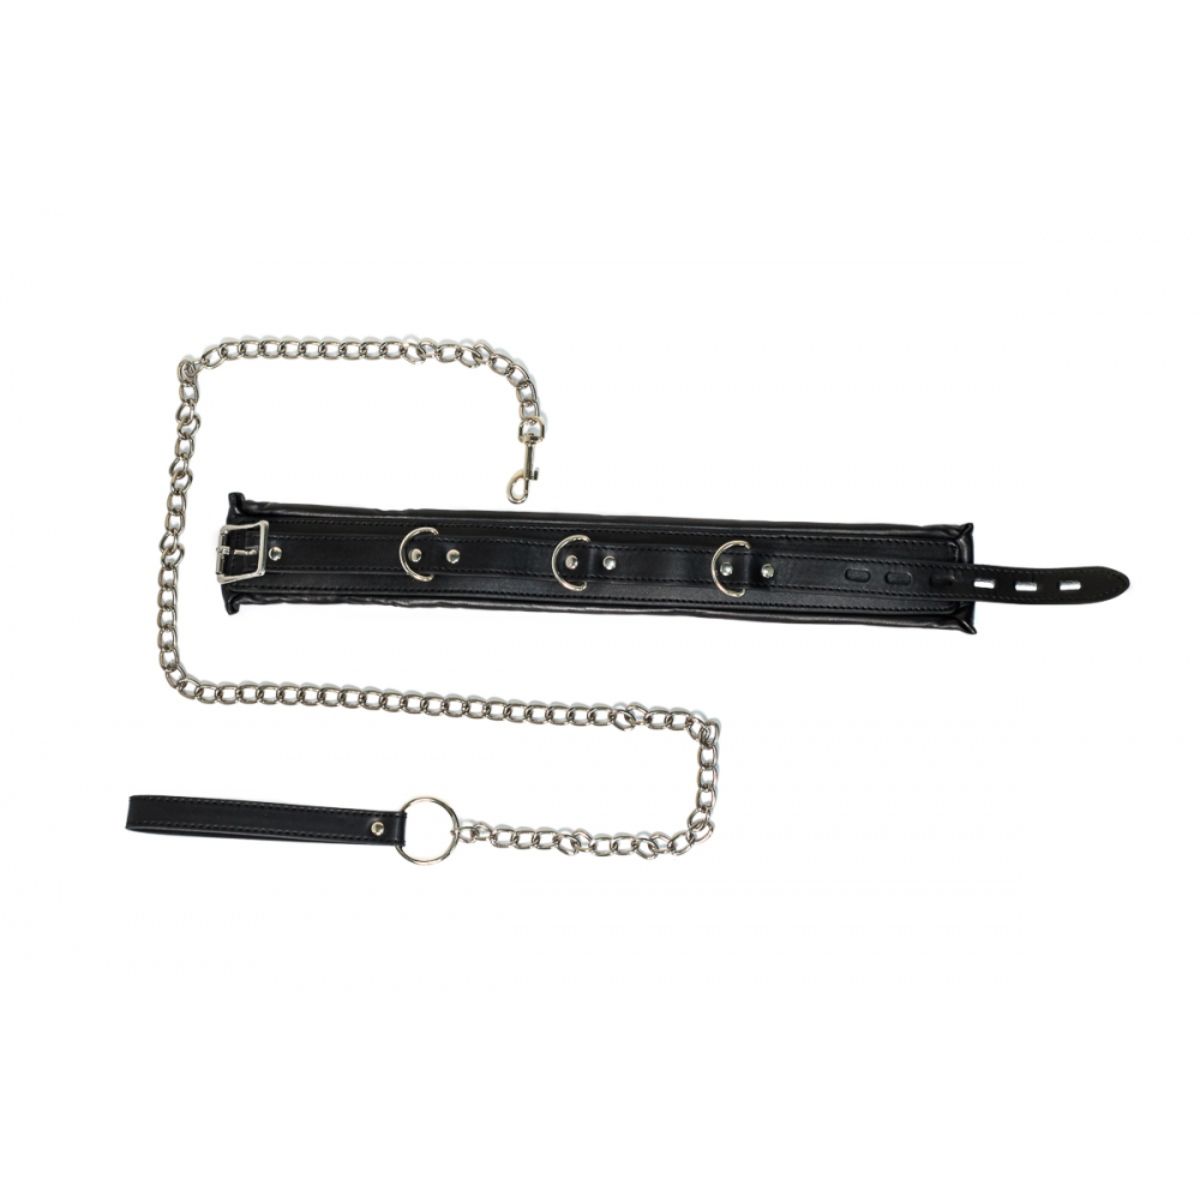 The Party Hard Fetish Collar & Chain Leash